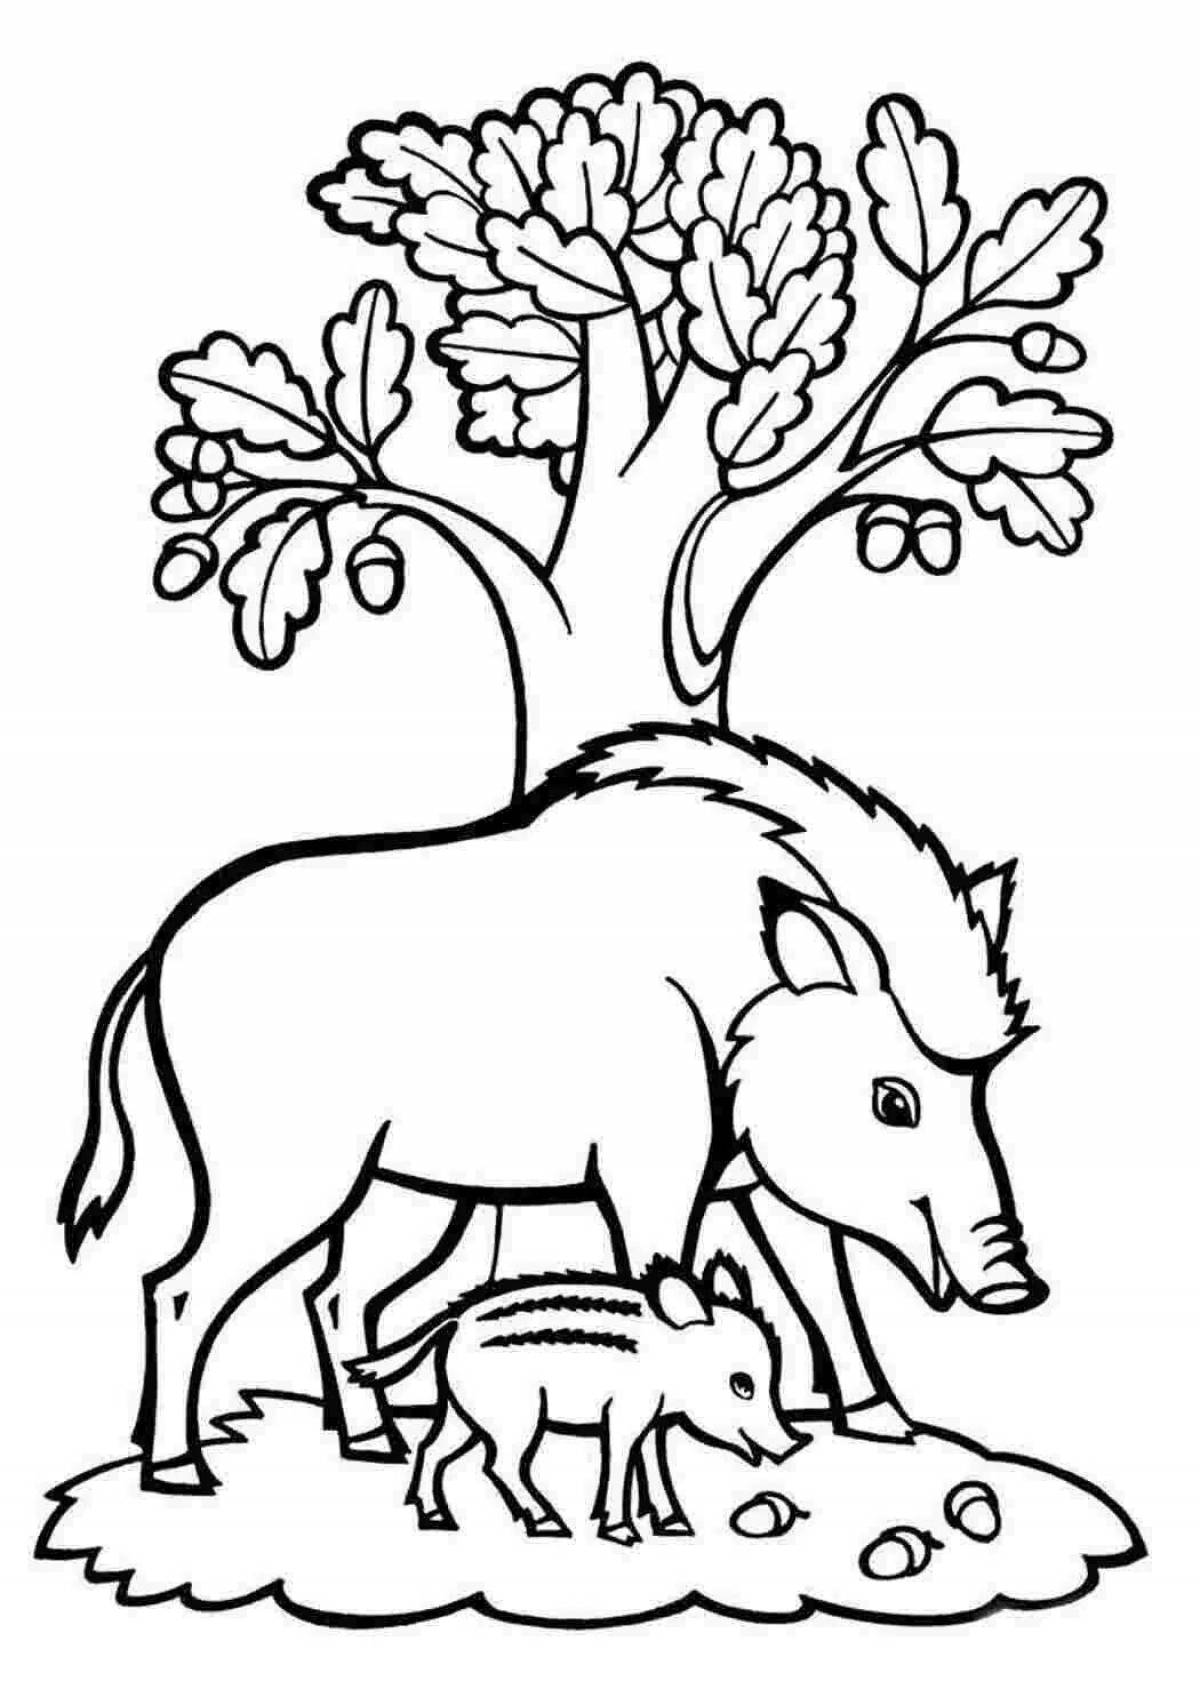 Adorable forest animals coloring page for kids